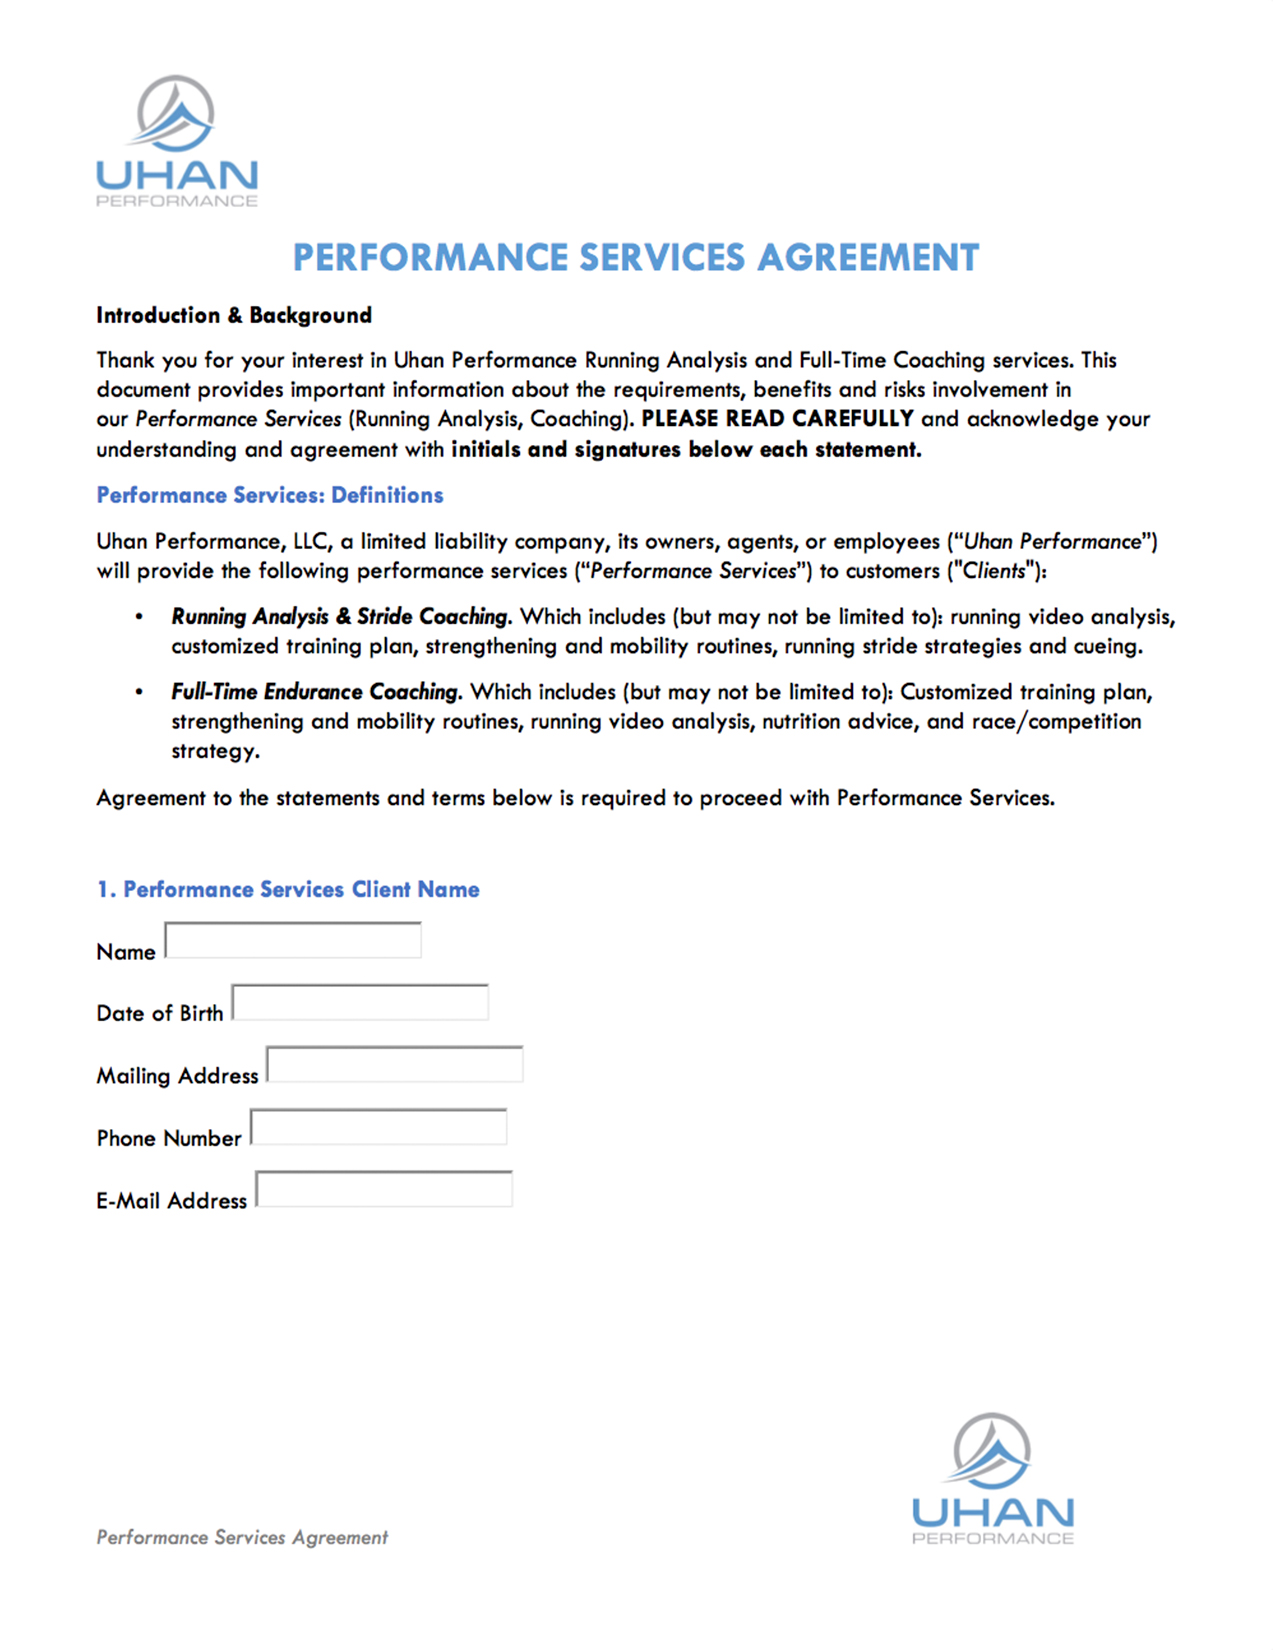 Performance Services Agreement